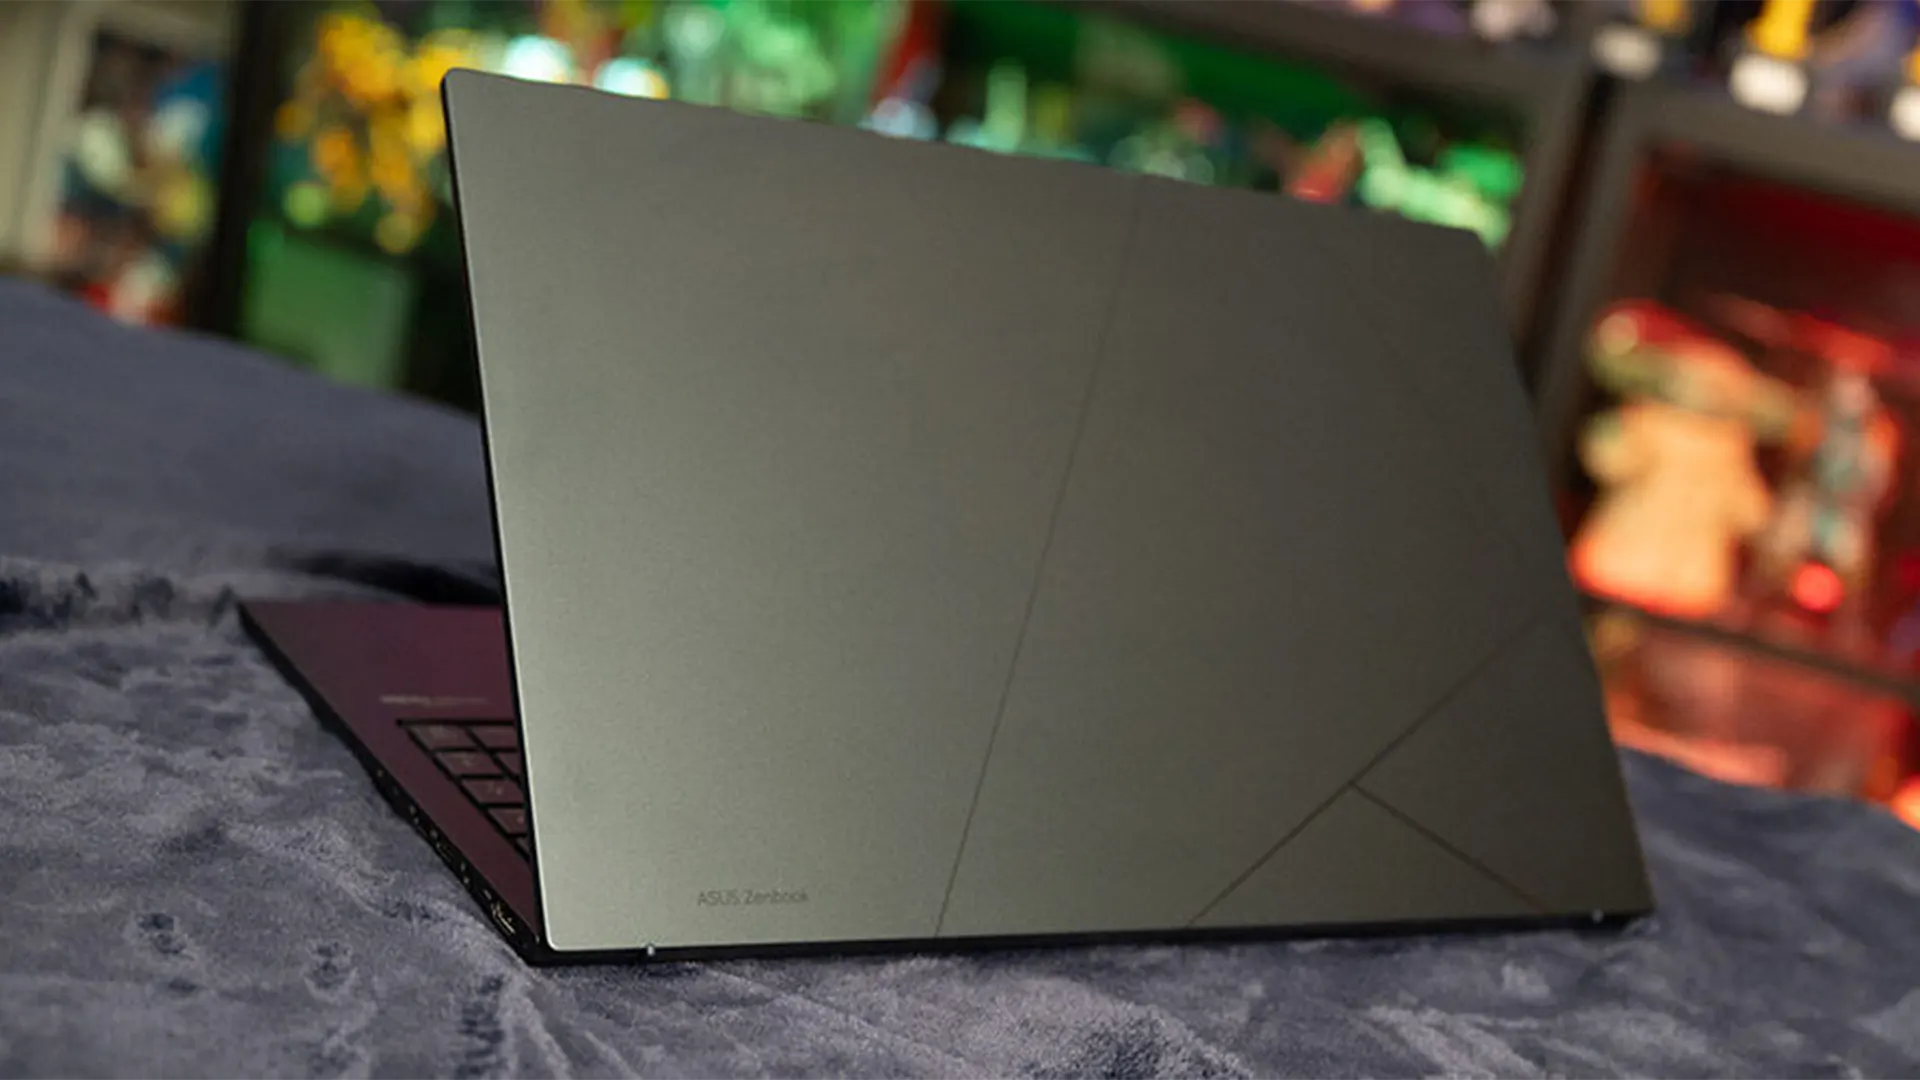 ASUS Zenbook 15 OLED review: Performance